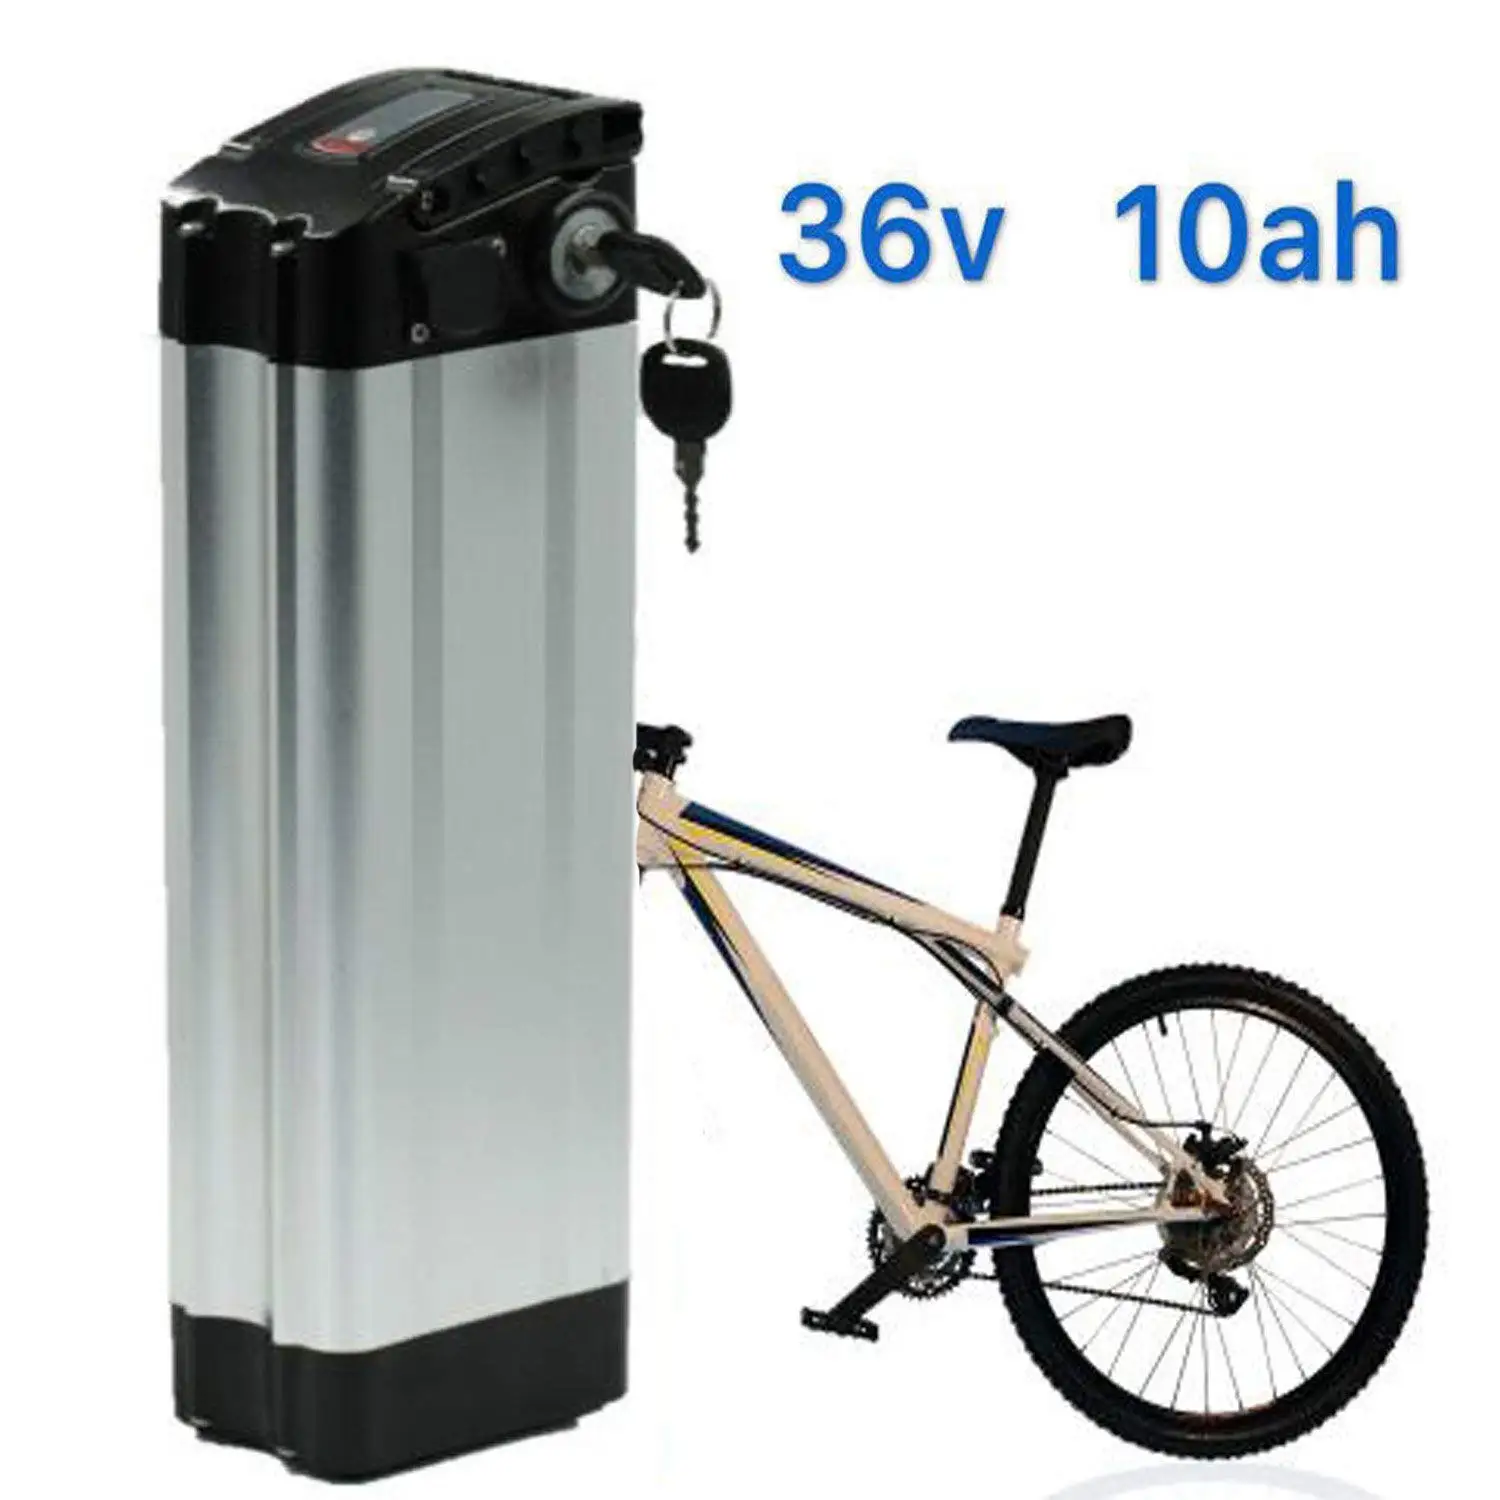 36V Lithium Ion Battery For E Bicycle